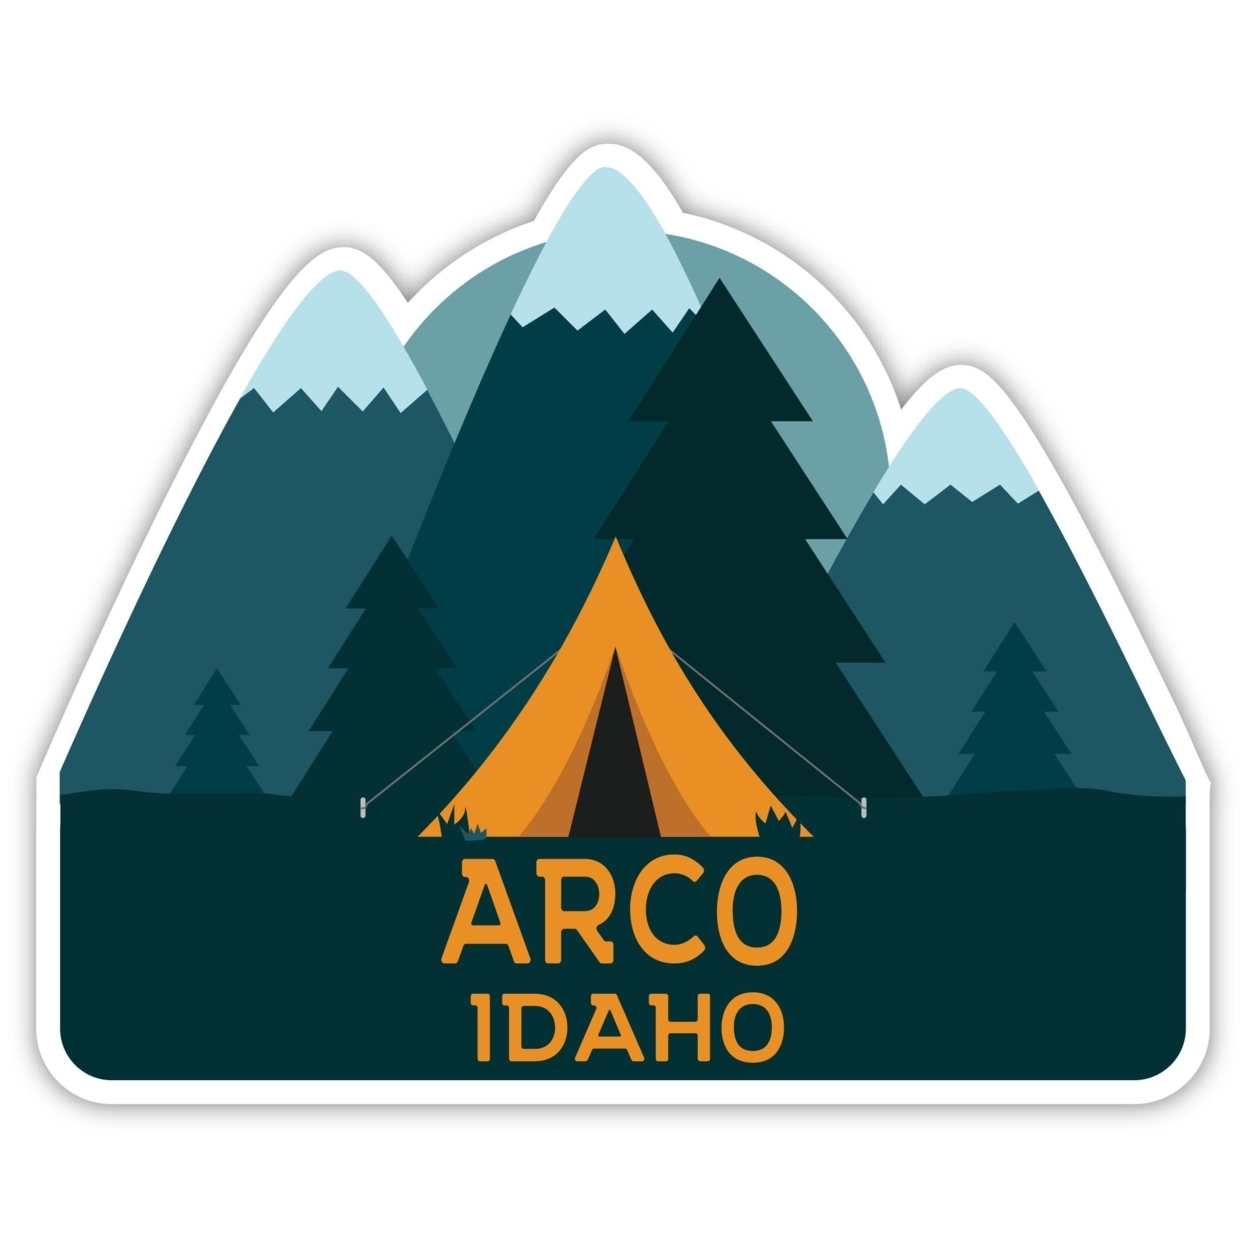 Arco Idaho Souvenir Decorative Stickers (Choose Theme And Size) - 4-Pack, 4-Inch, Tent